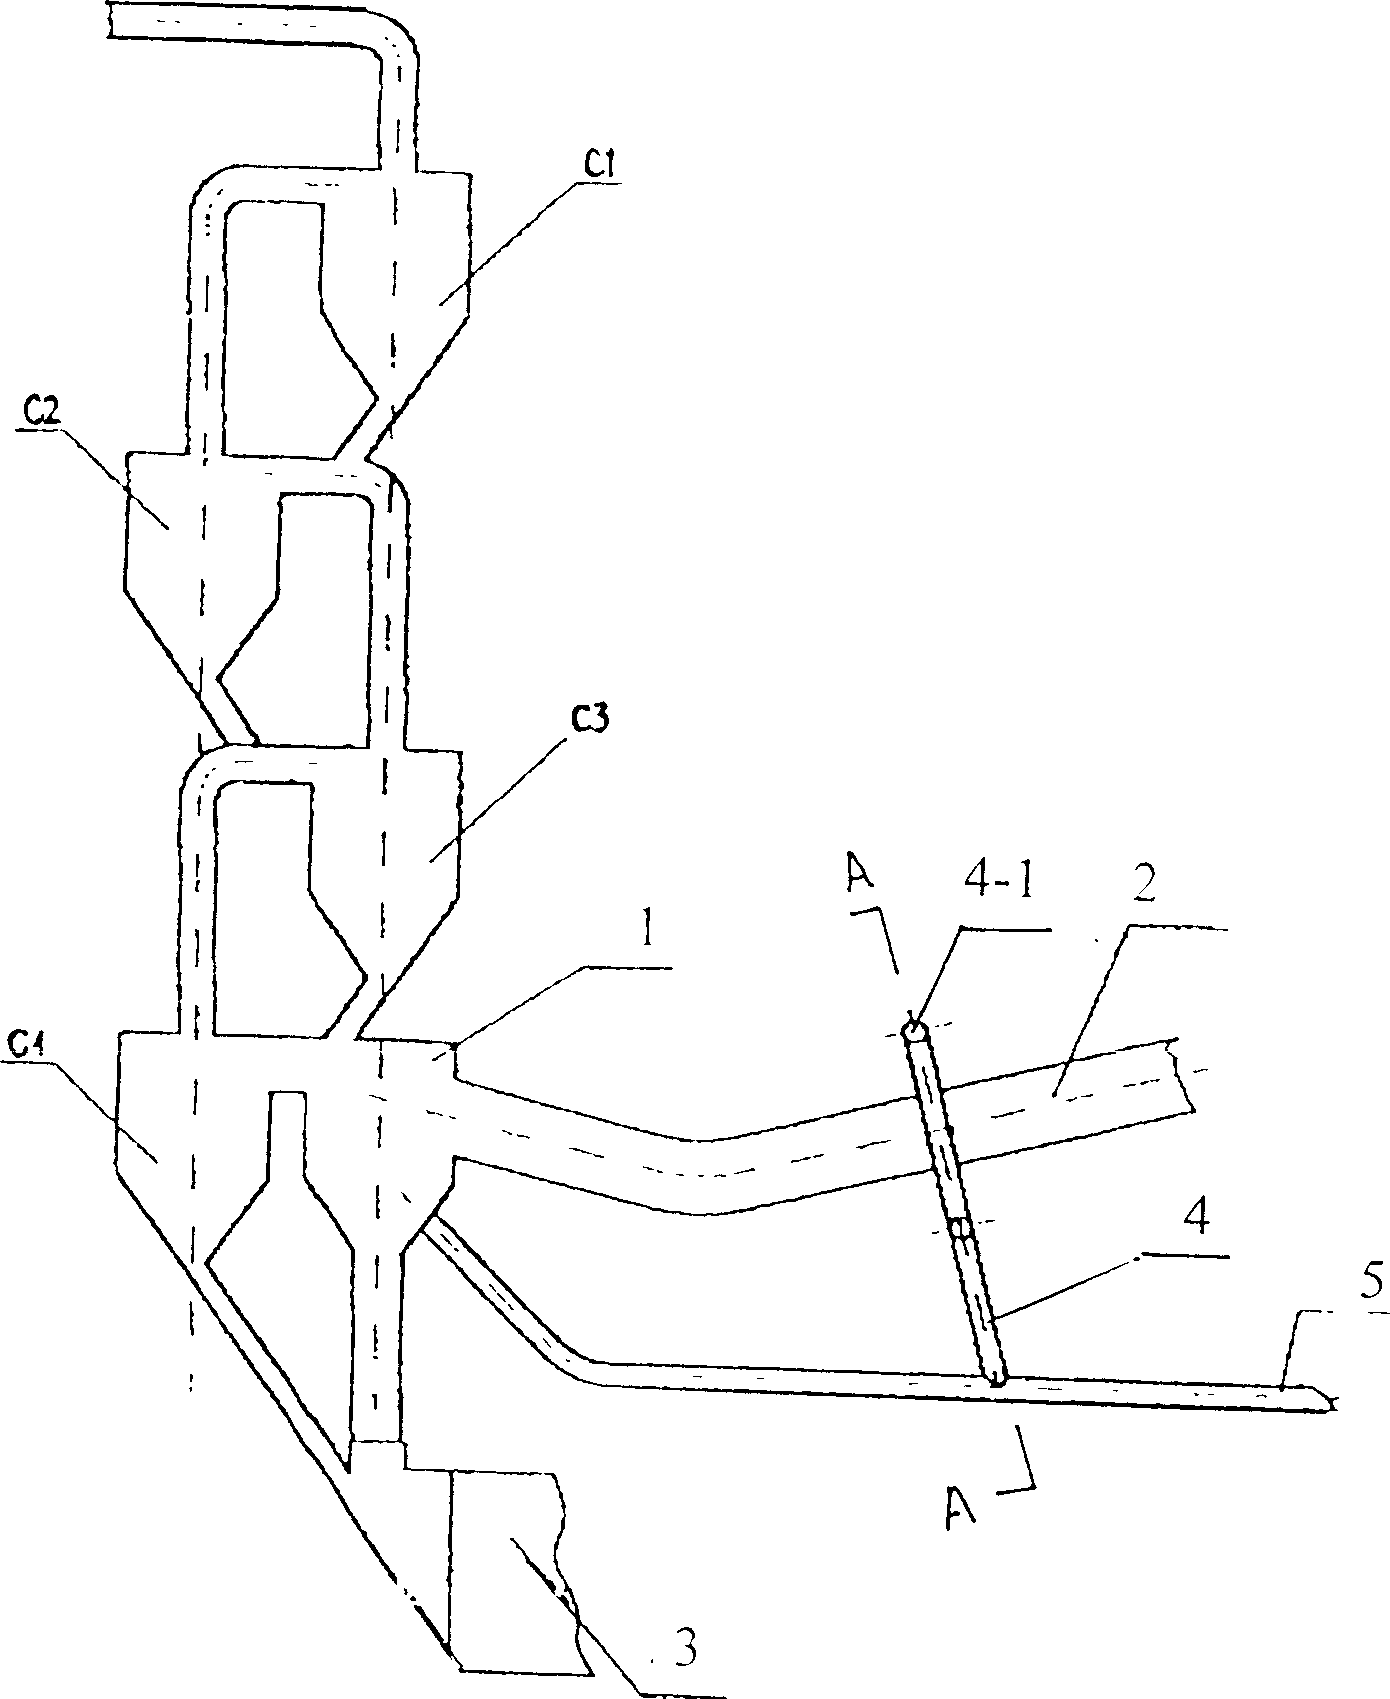 Tertiary air duct coal powder preheating and prefiring method for cement predecomposition kiln